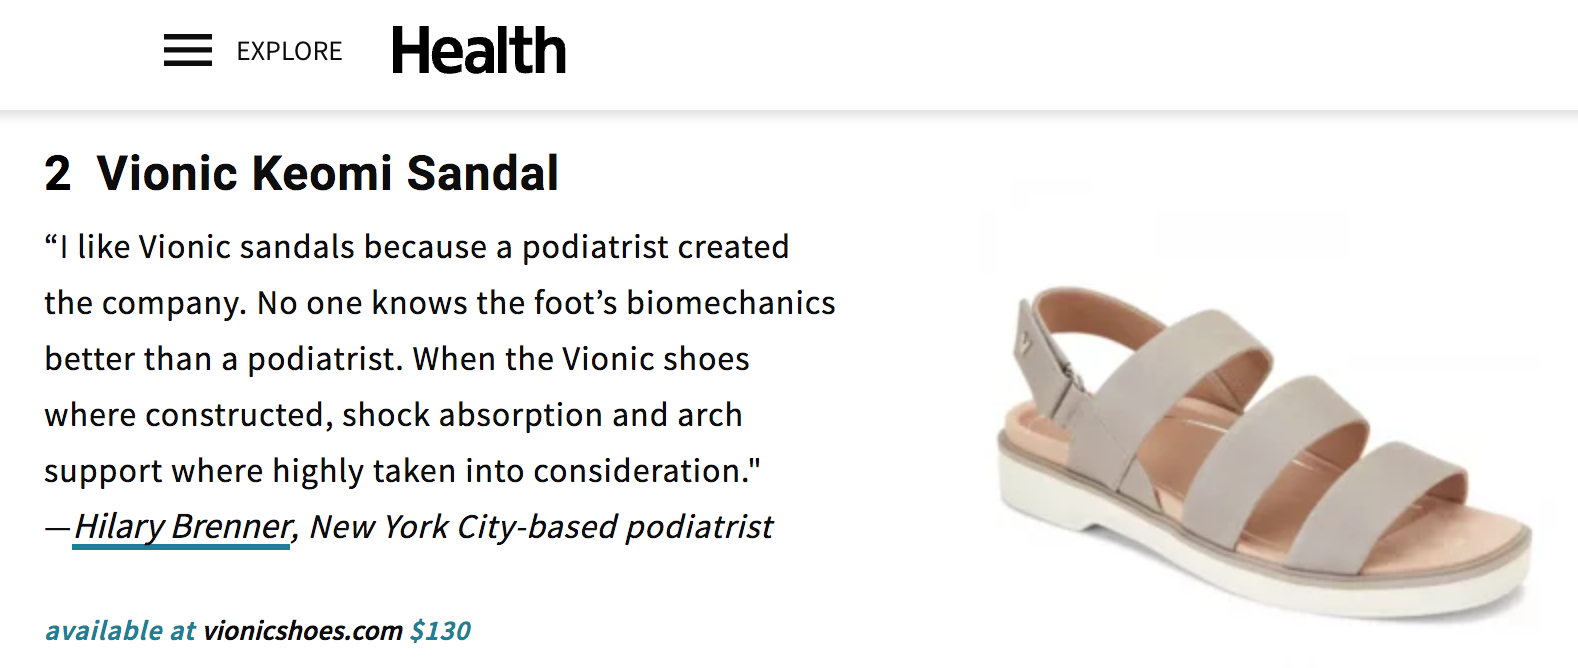 Our Keomi Sandal is listed as one of 